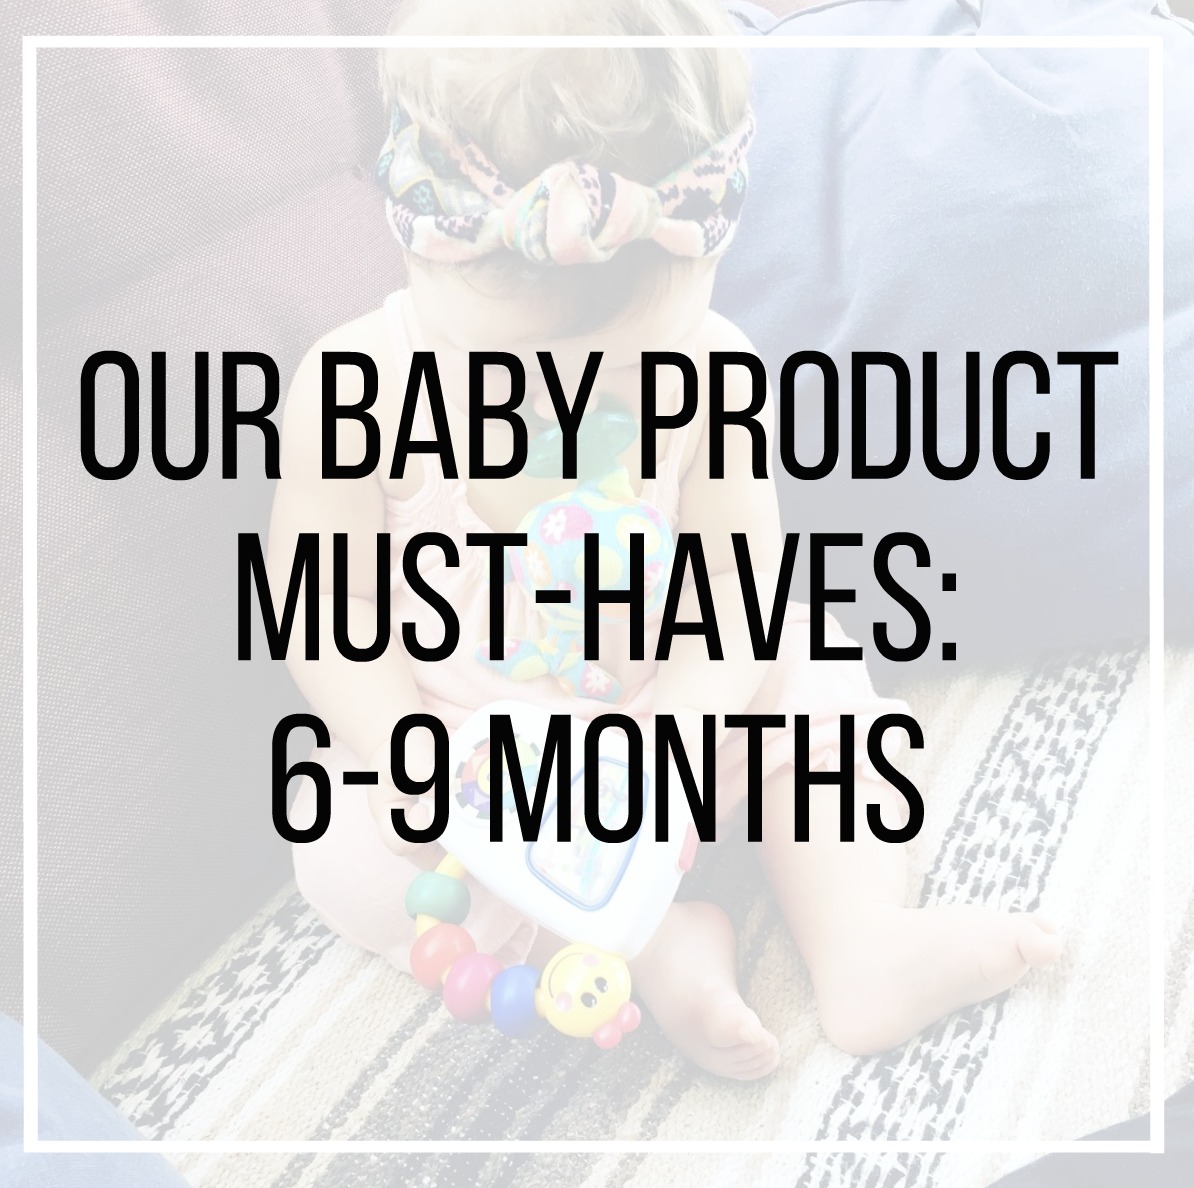 Our Baby Product Must-Haves: 6-9 Months